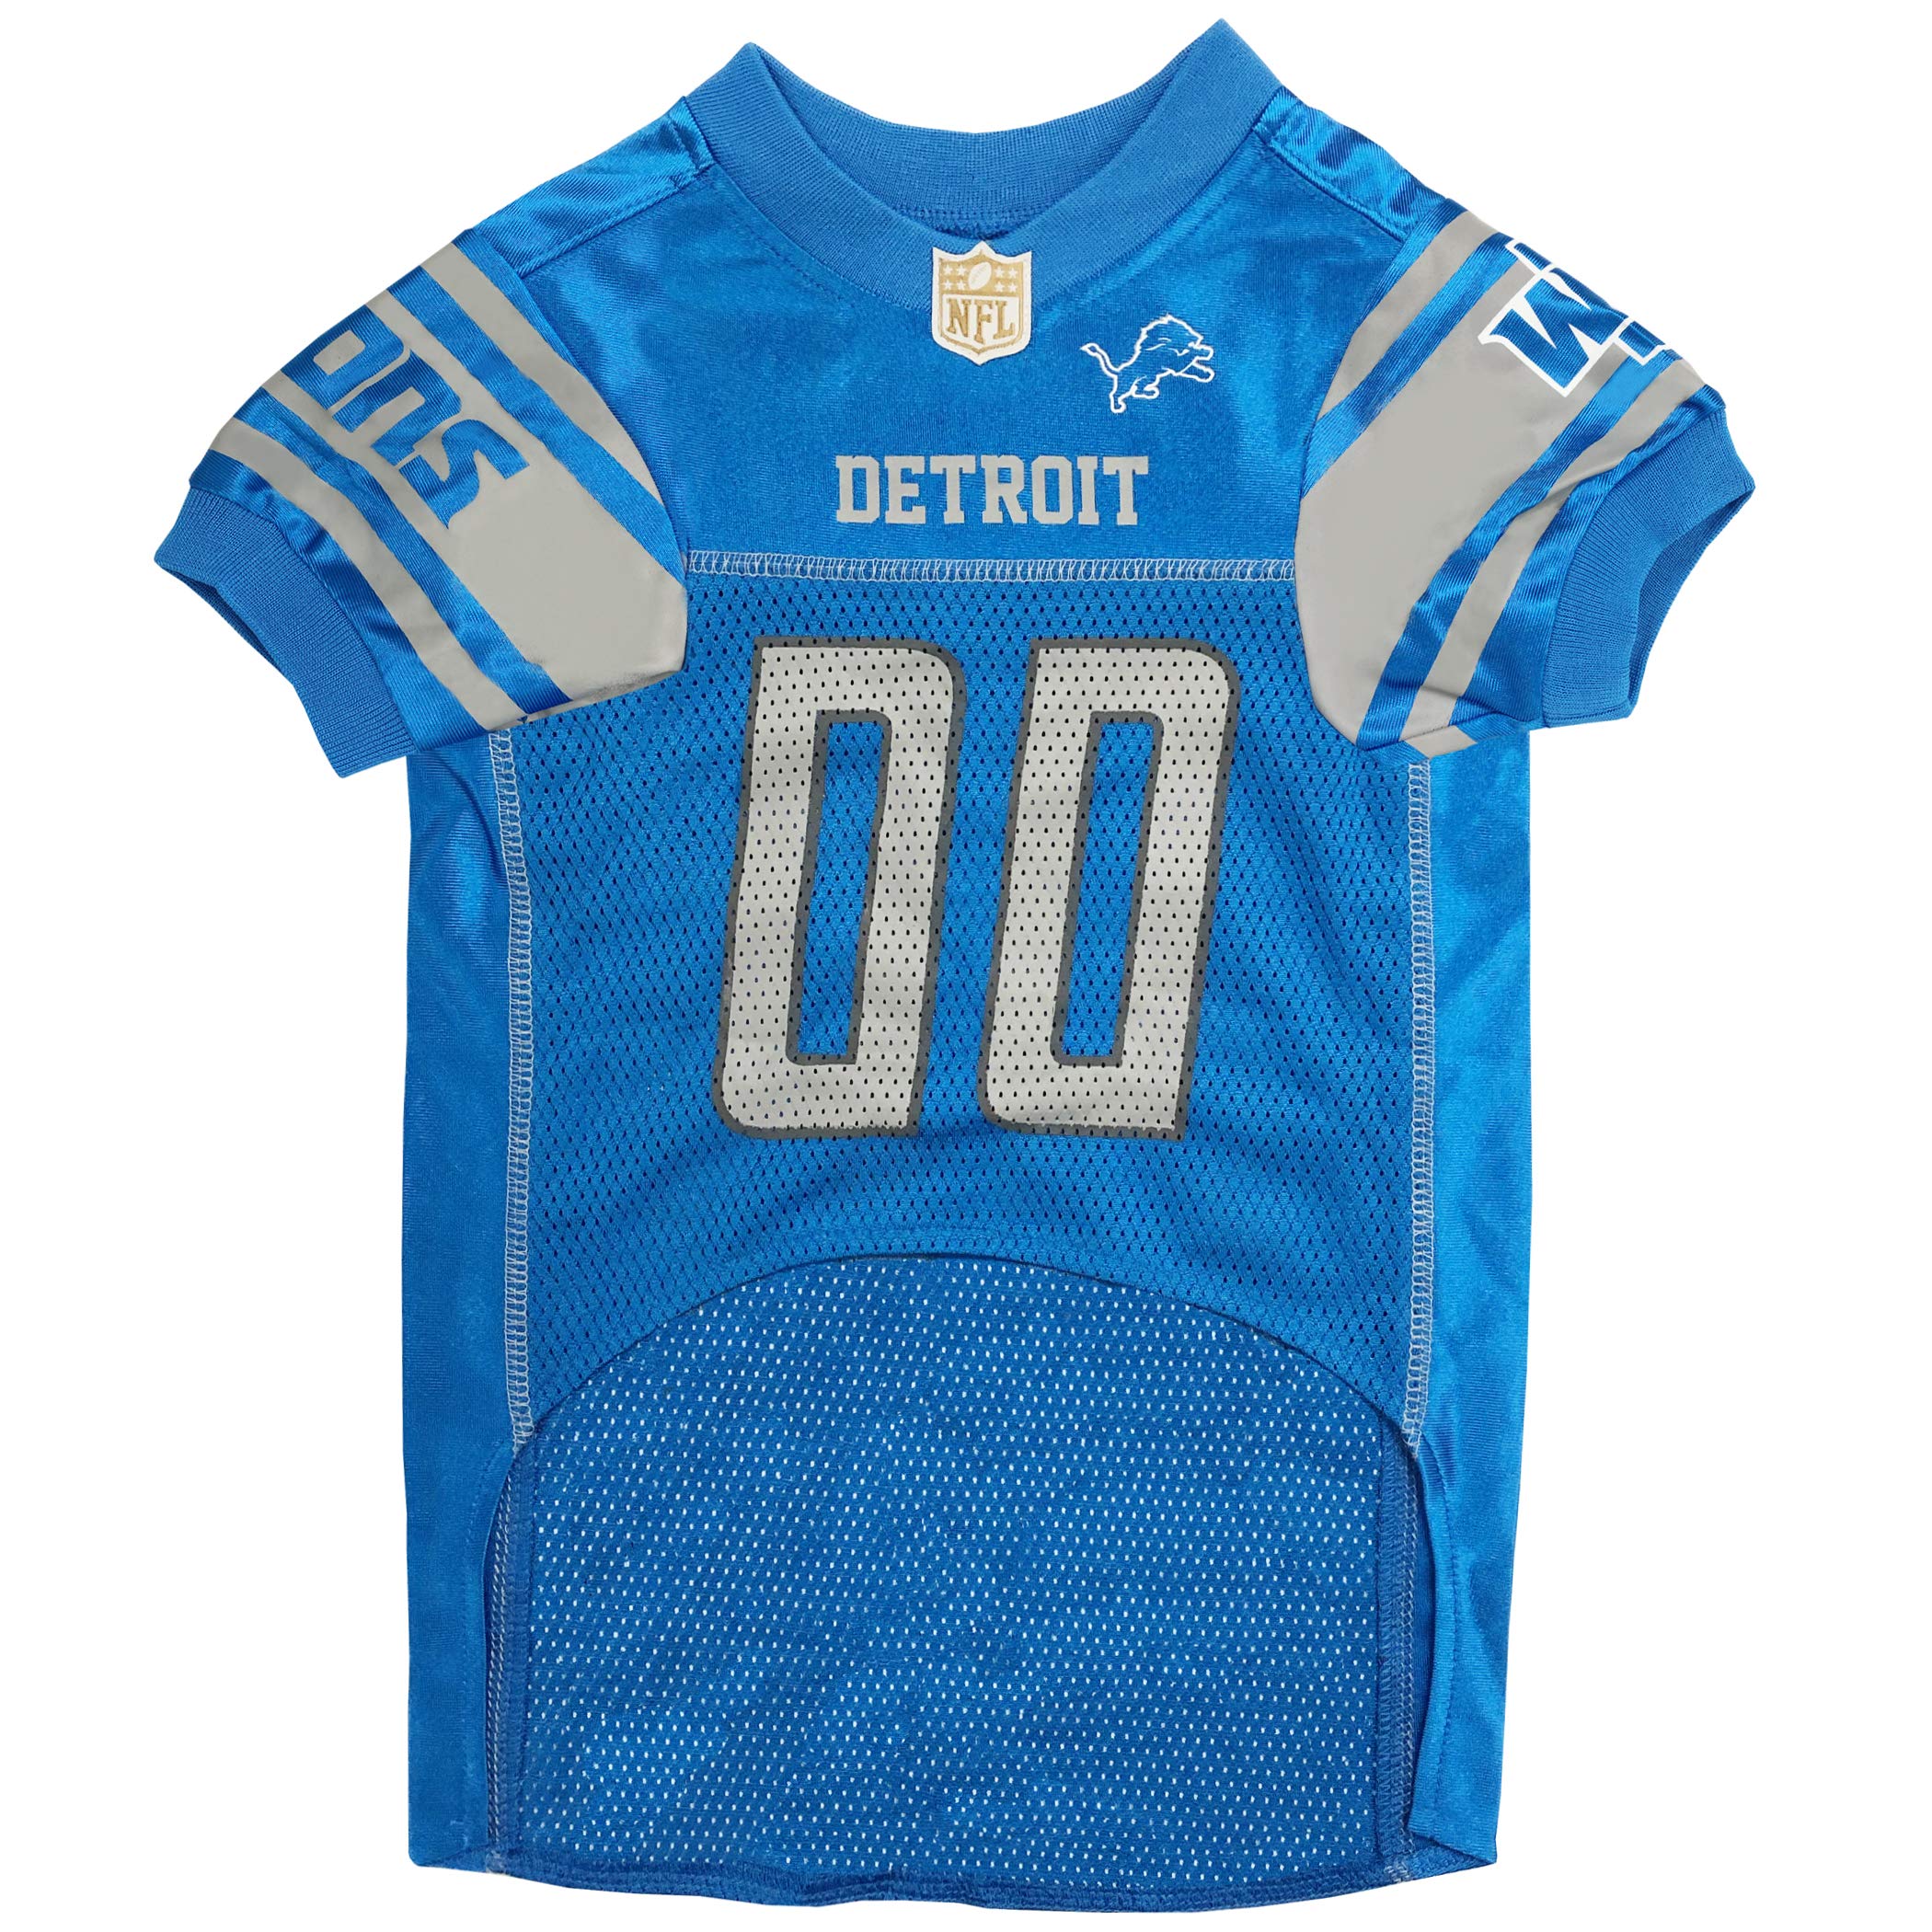 NFL Detroit Loins Dog Jersey, Size: Medium. Best Football Jersey Costume for Dogs & Cats. Licensed Jersey Shirt.